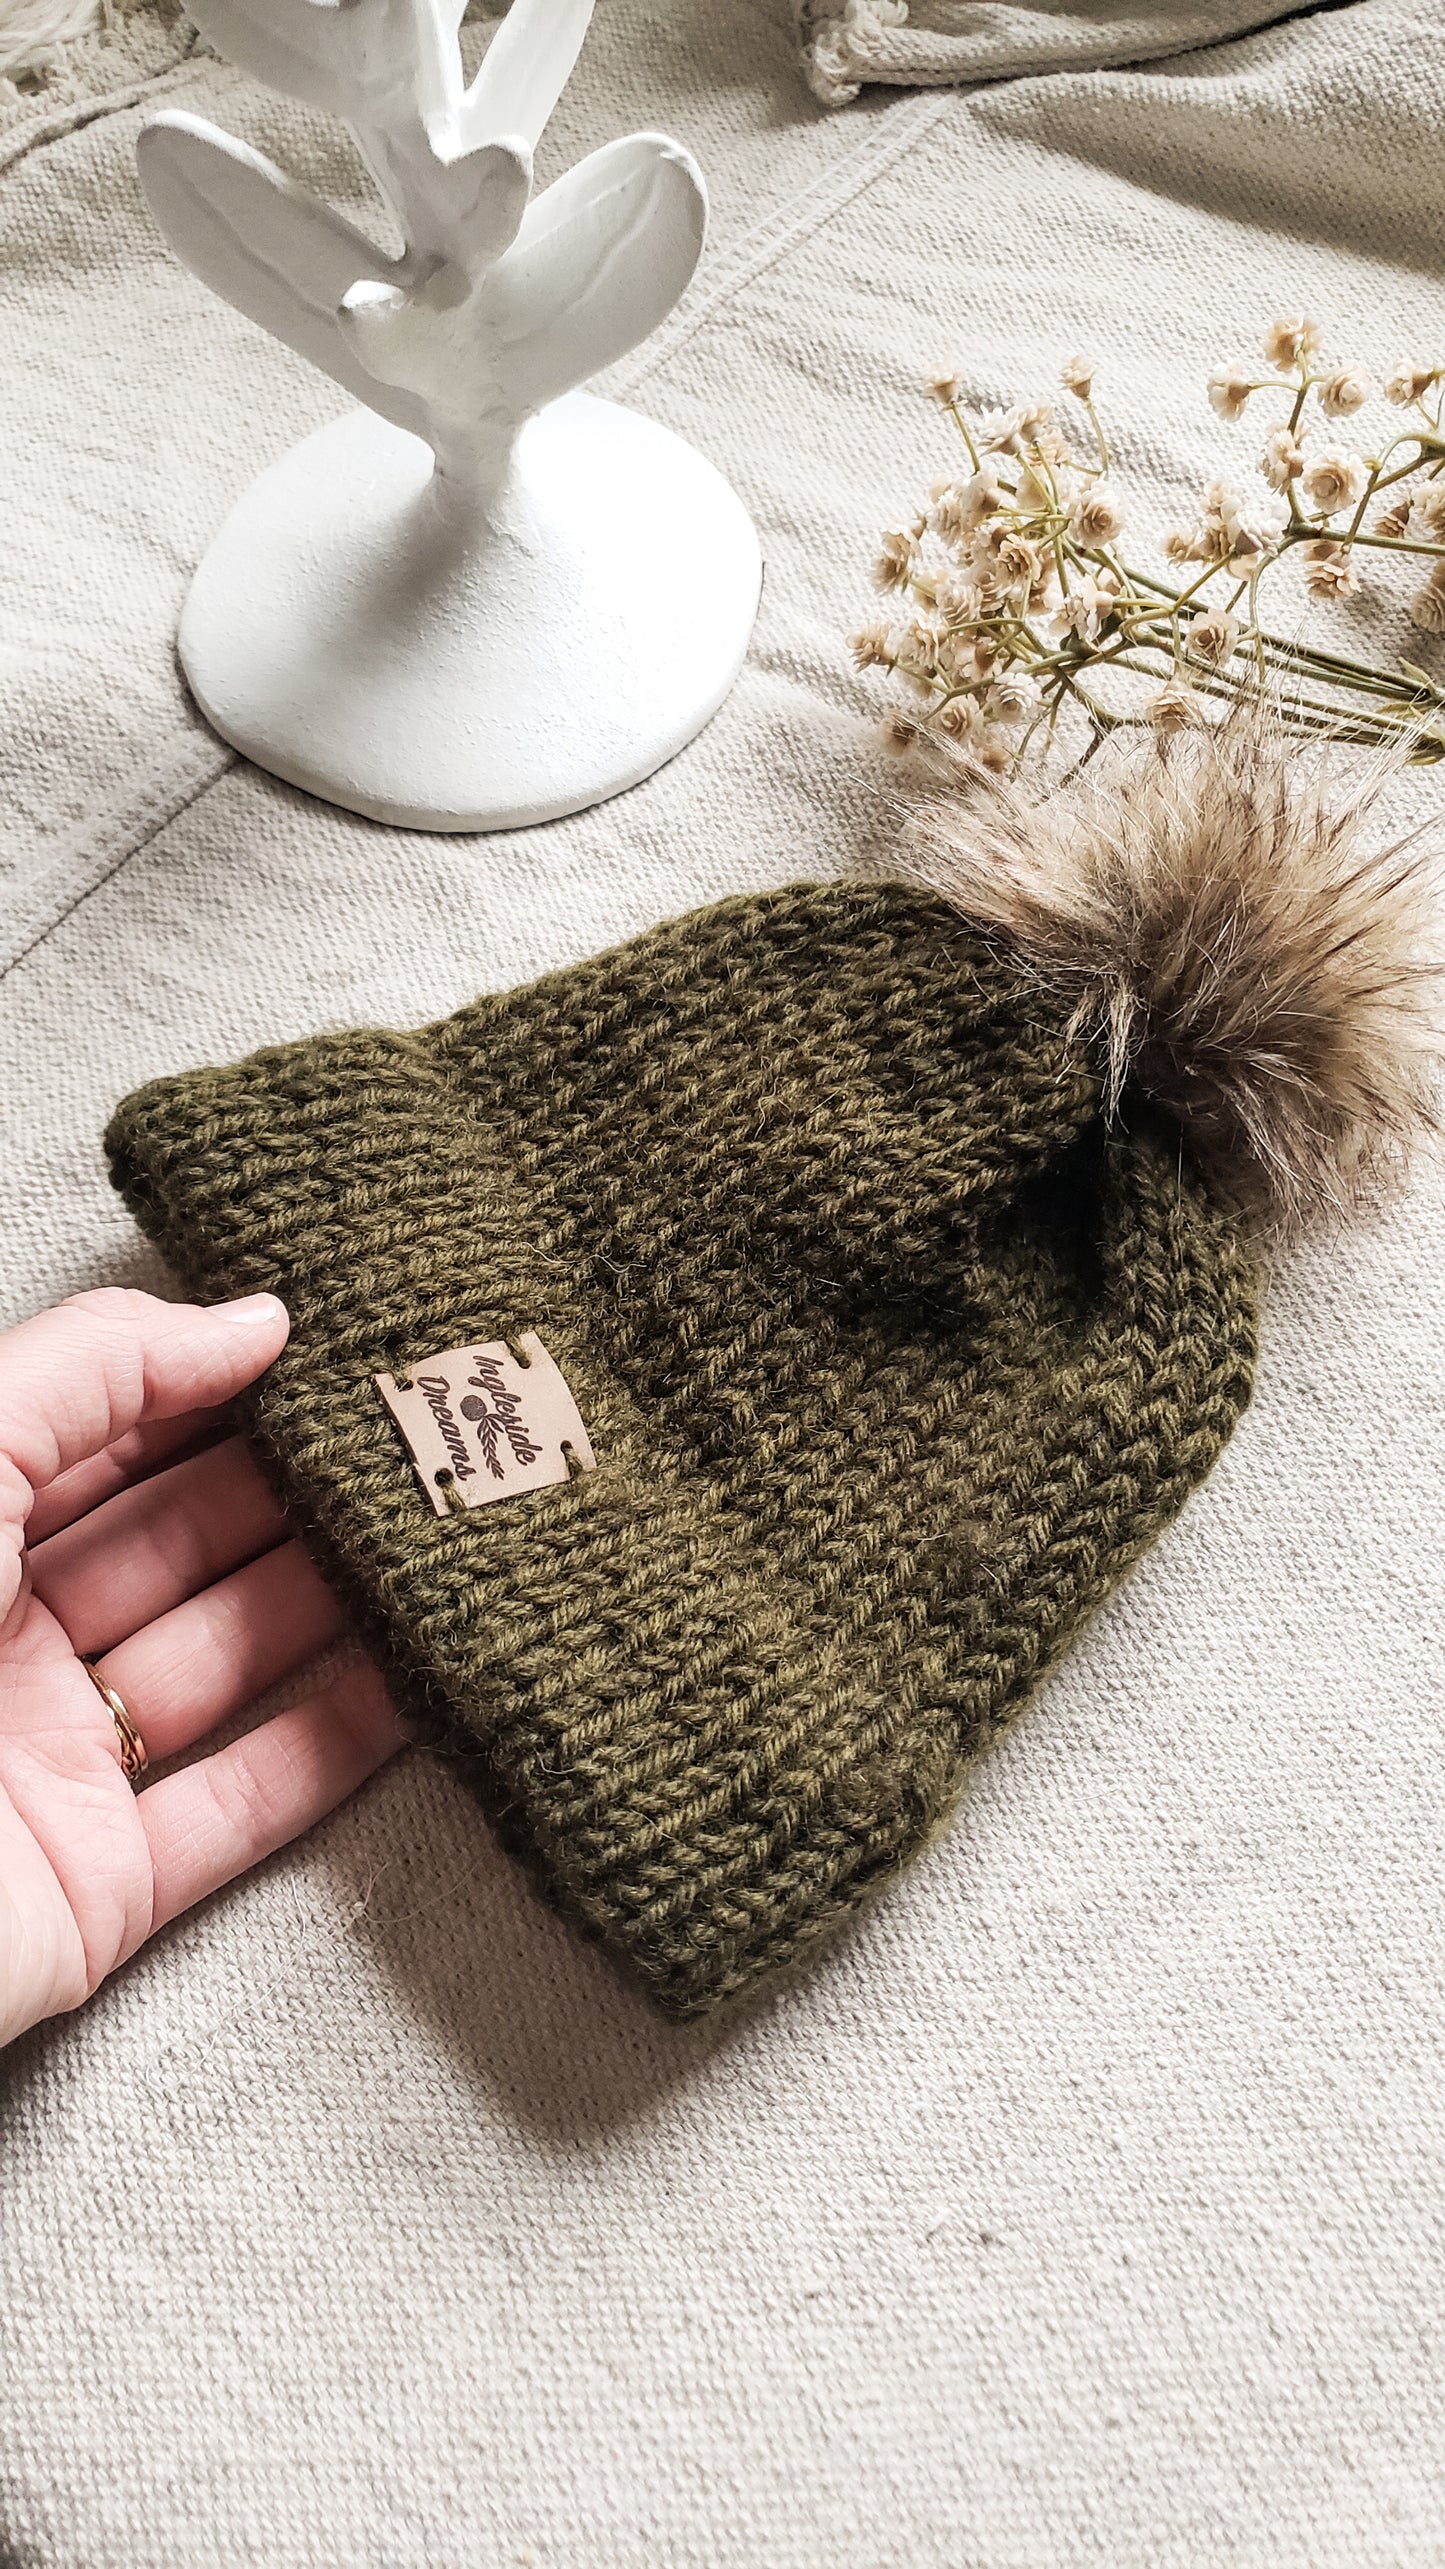 Double Brim Hand Knit Baby Beanie, 100 % Wool in {Forest Green}